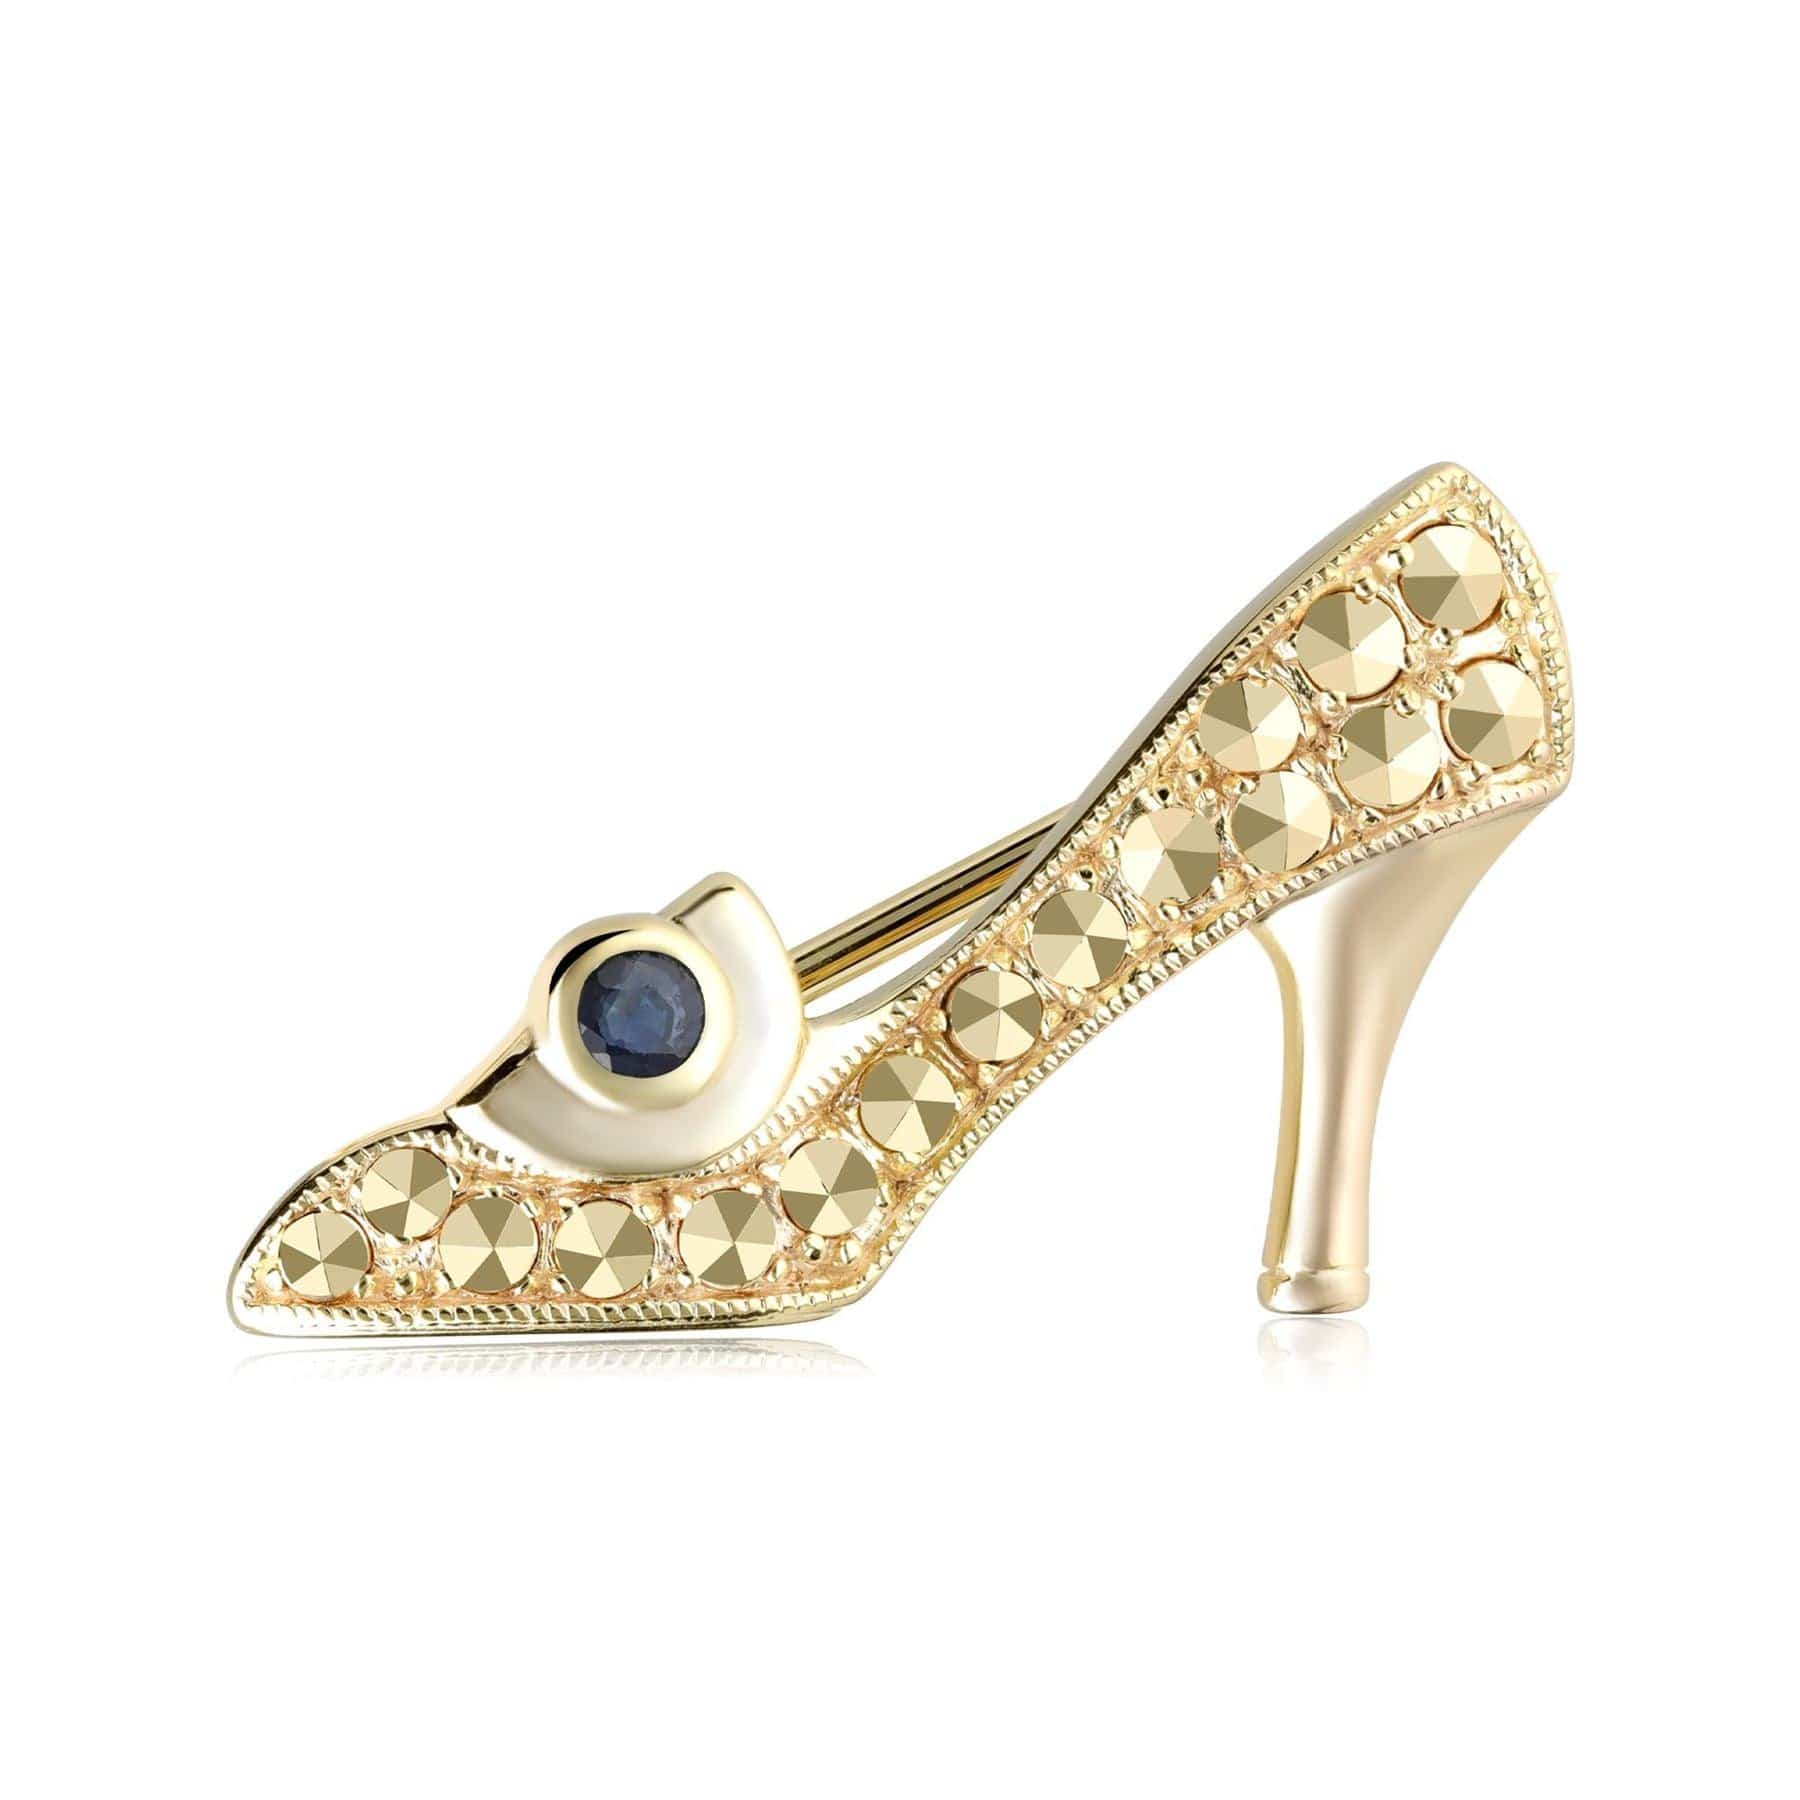 Sapphire & Marcasite Shoe Brooch in 18ct Gold Plated Silver